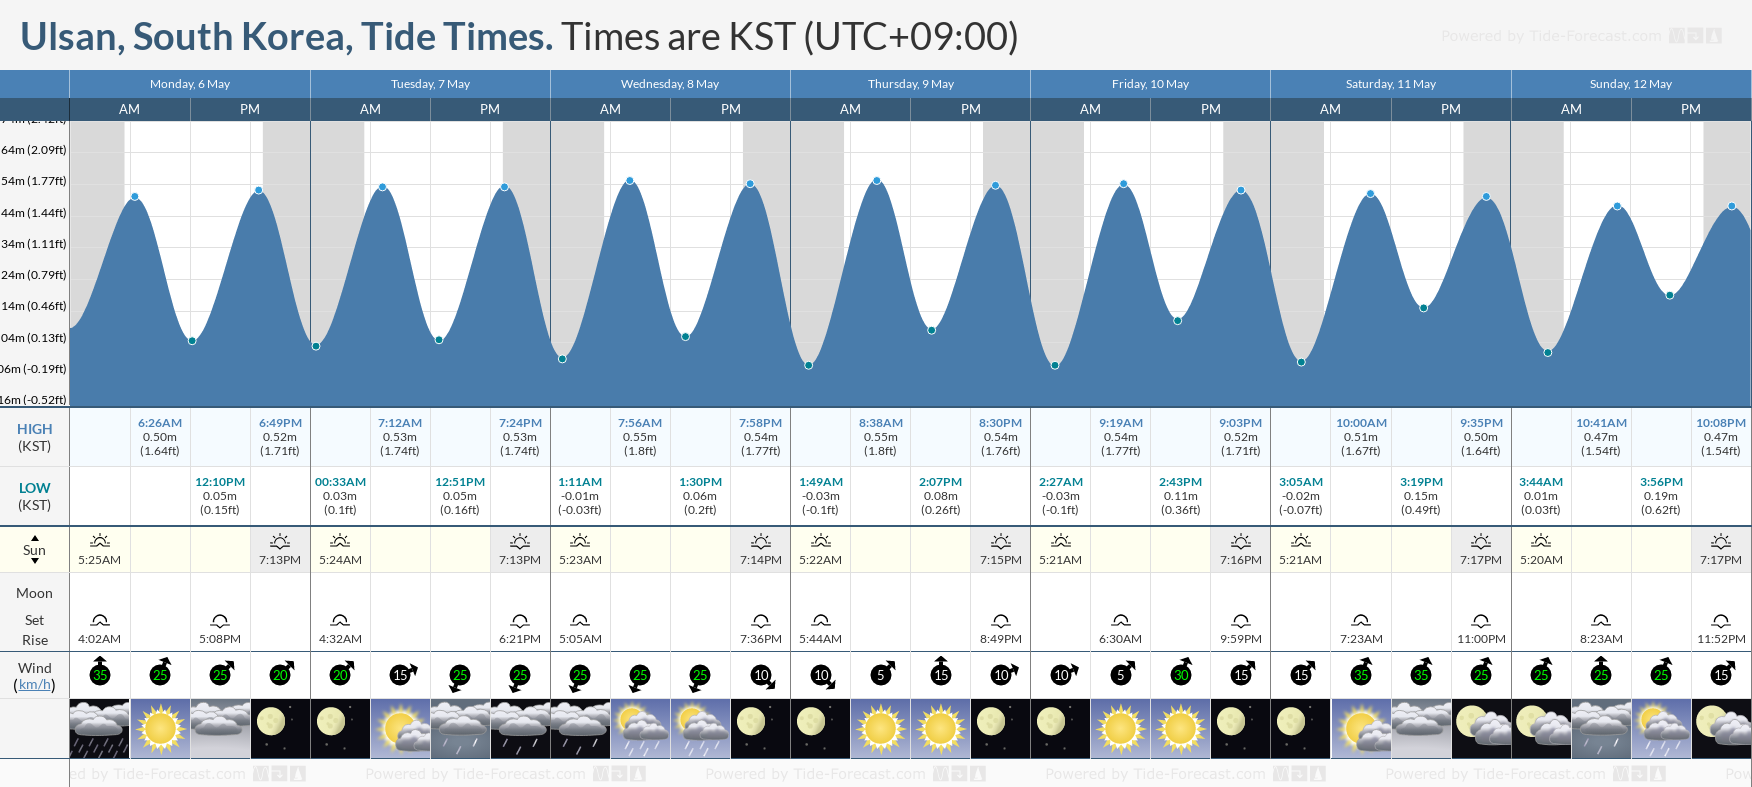 Ulsan, South Korea Tide Chart including high and low tide tide times for the next 7 days